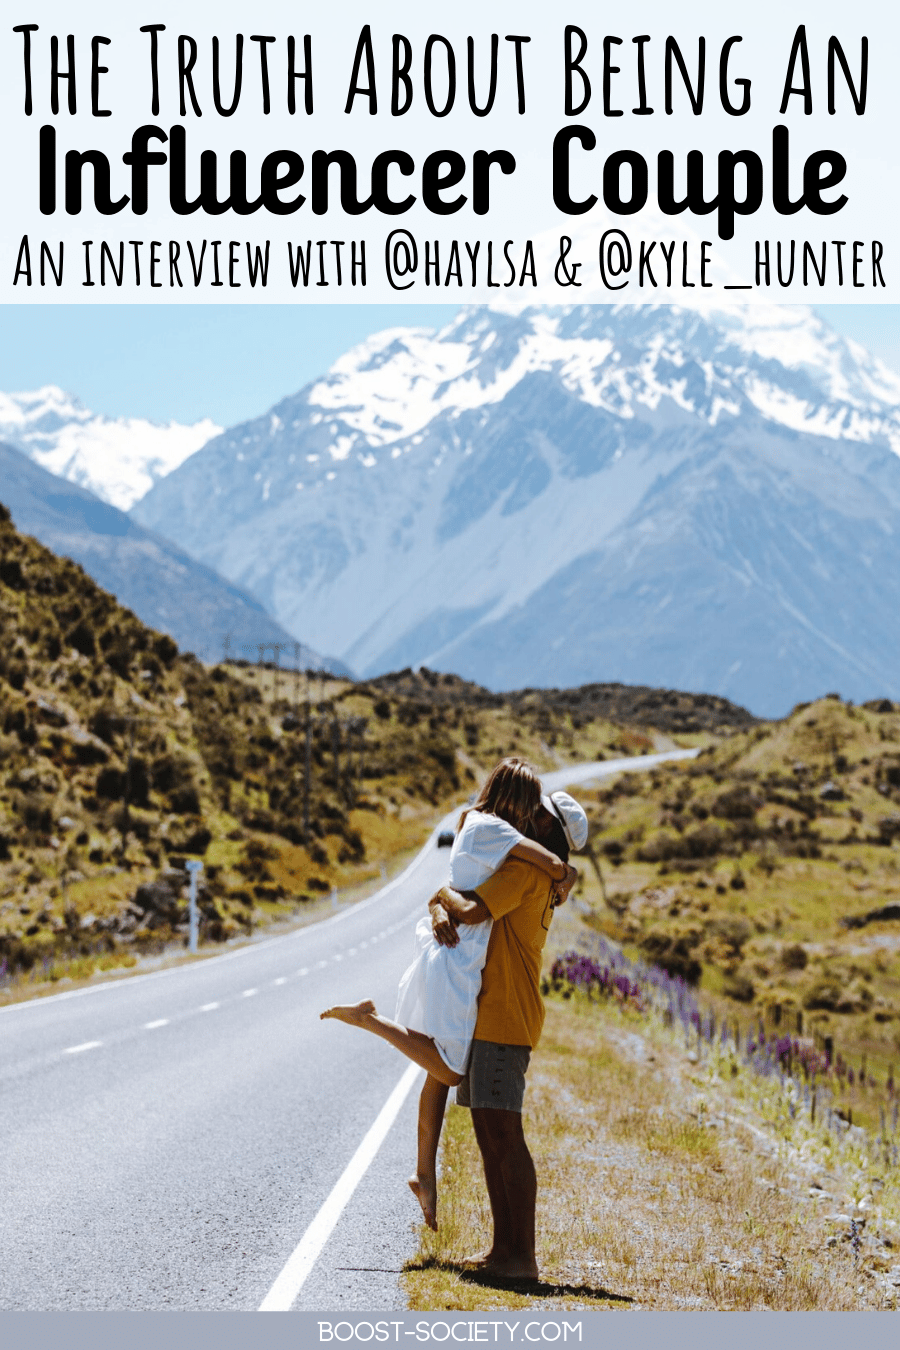 Click here to find out what it is really like to work full-time with your partner in this interview with influencer couple @haylsa and @kyle_hunter. #influencer #instagram | travel influencer | influencer Instagram | how to be an influencer | Instagram influencer | how to be a travel influencer | travel influencer content | travel influencer Instagram | Instagram influencer couples | influencer couple | couples who work together motivation | travel couple goals | travel couple photography